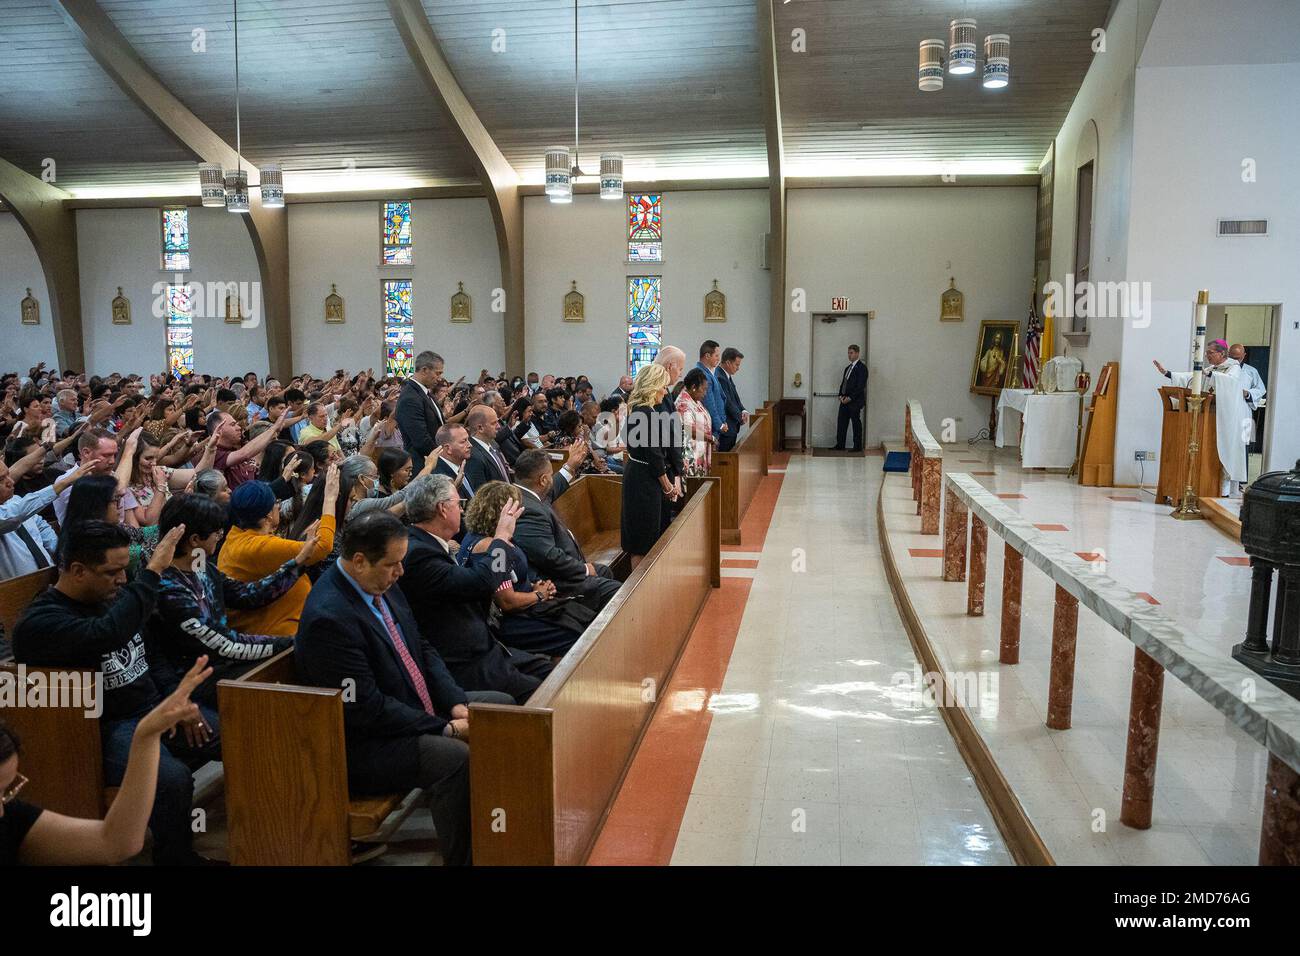 Reportage: President Joe Biden and First Lady Jill Biden attend mass at Sacred Heart Catholic Church in Uvalde, Texas on Sunday, May 29, 2022, after visiting the memorial site for the victims of the May 24 mass shooting at Robb Elementary School. Stock Photo